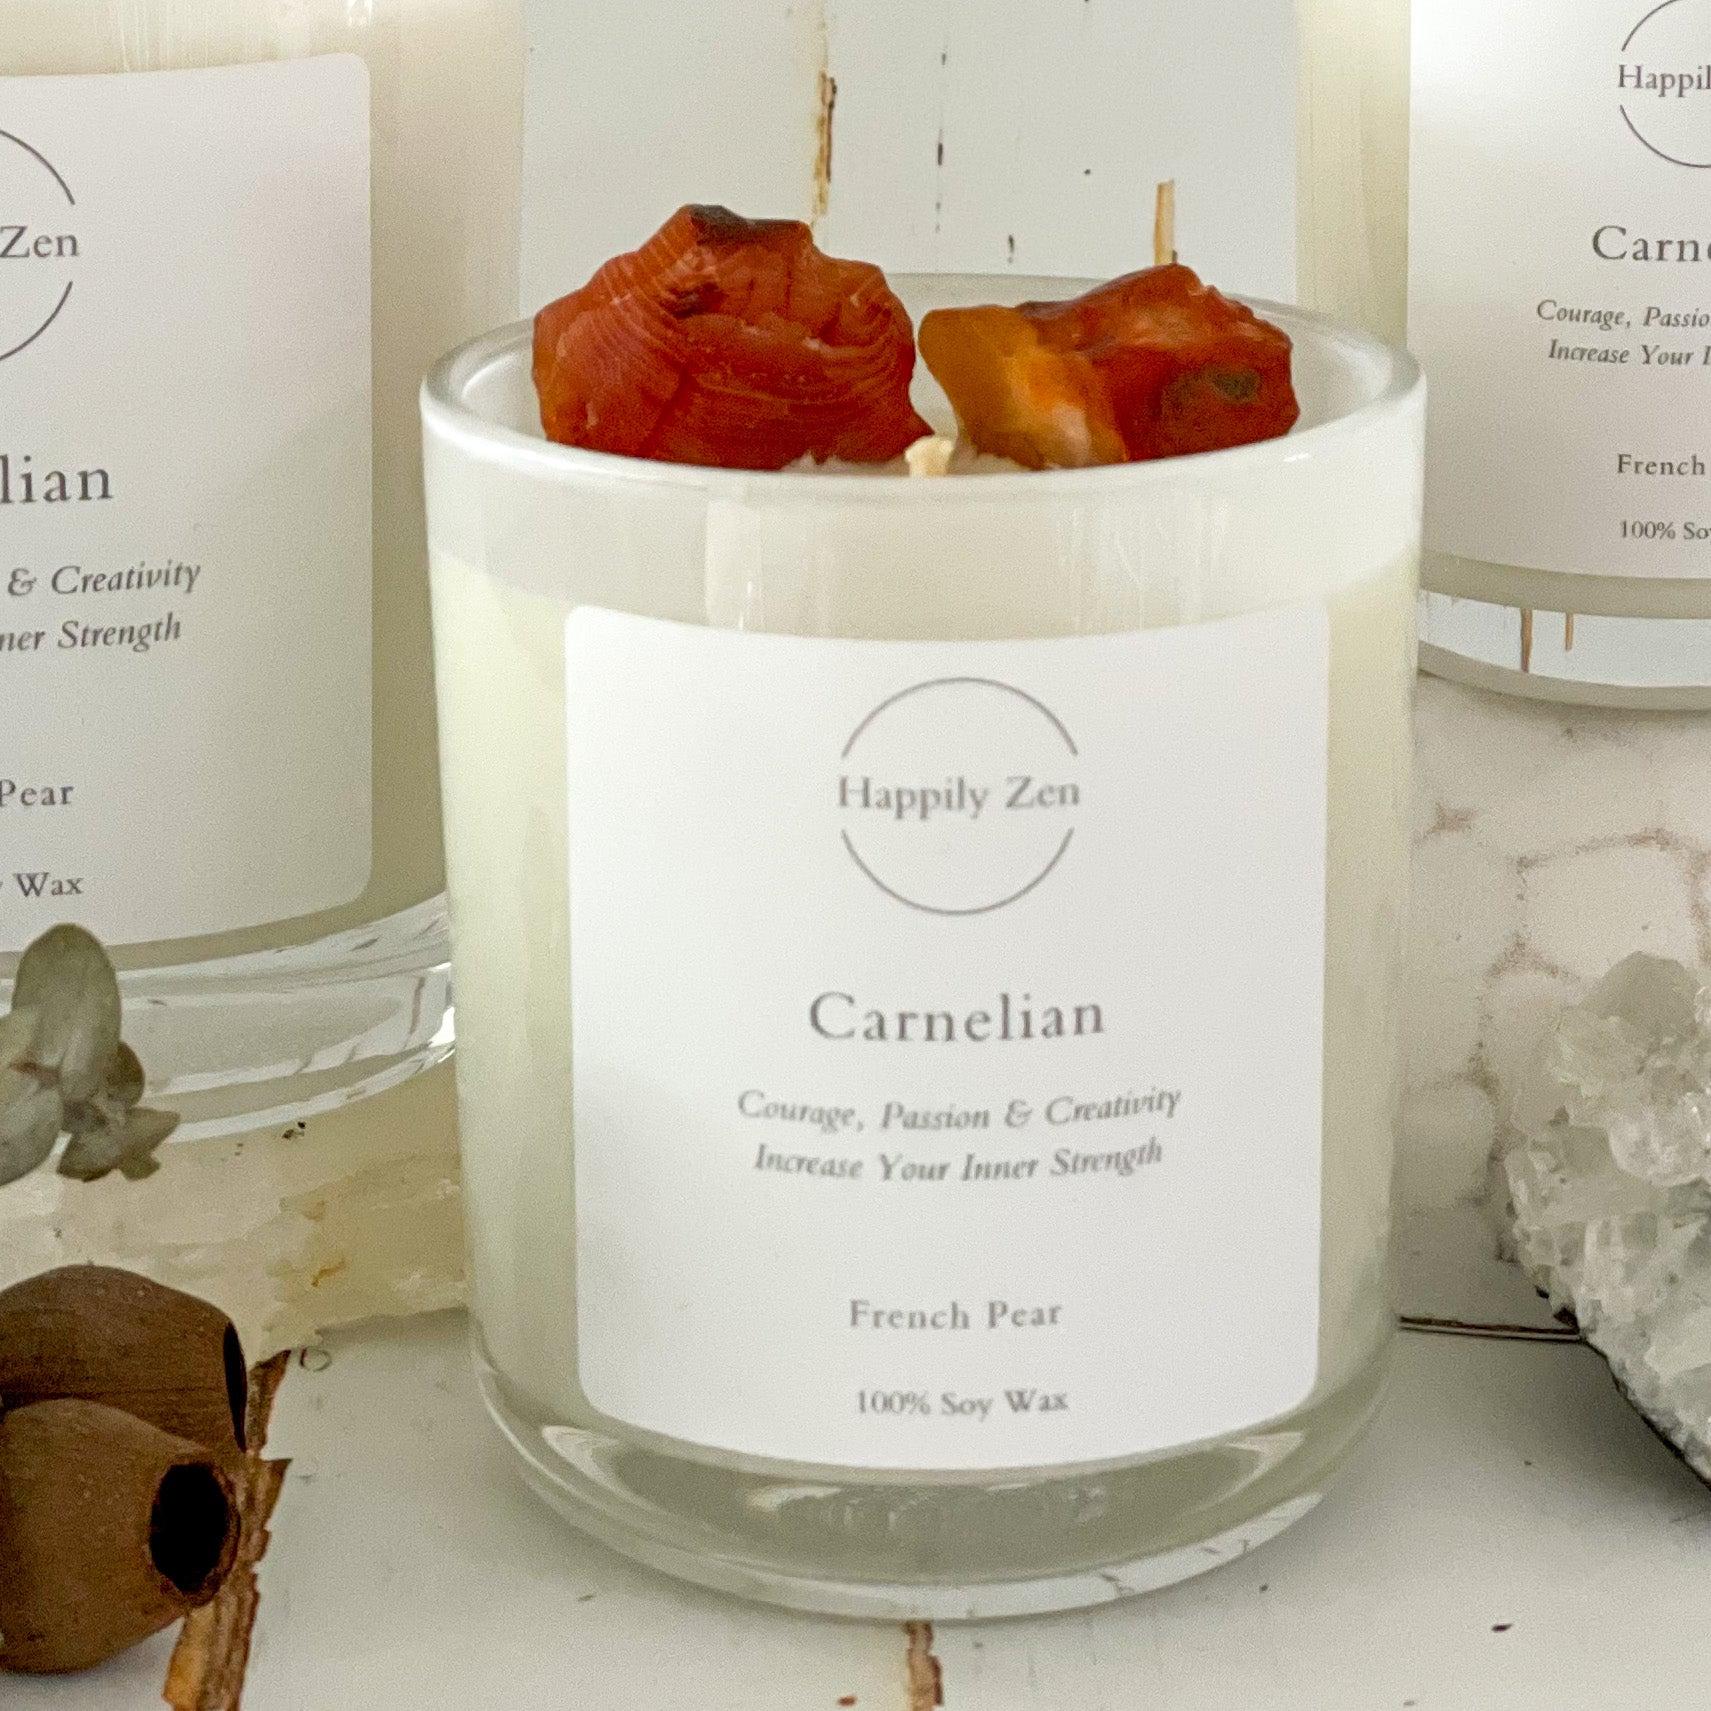 Carnelian - French Pear Candle-Happily Zen